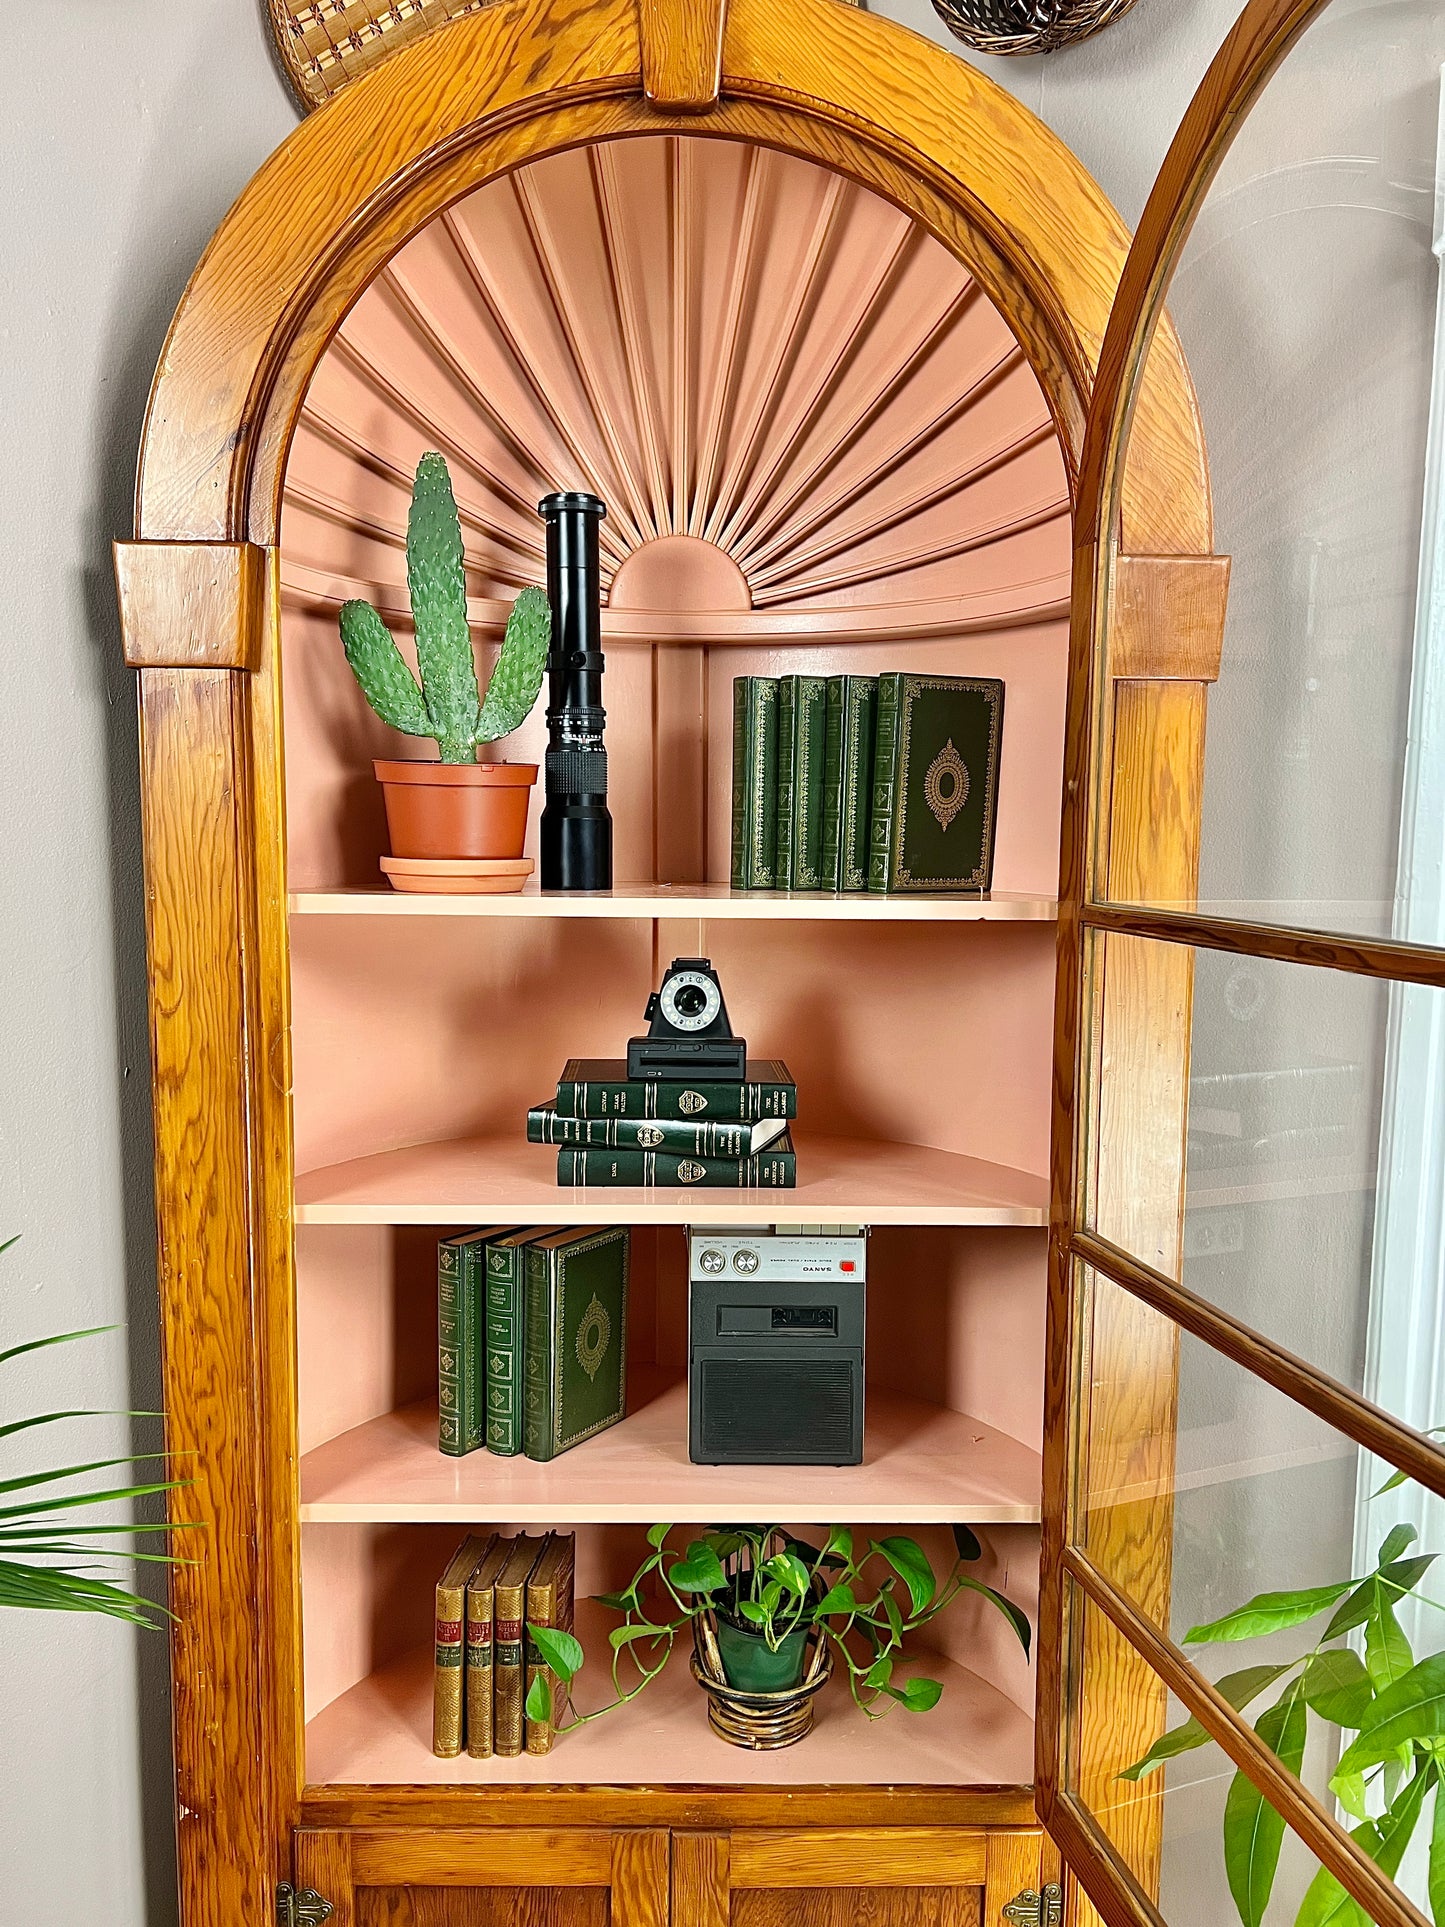 The Pink Clamshell Corner Cabinet